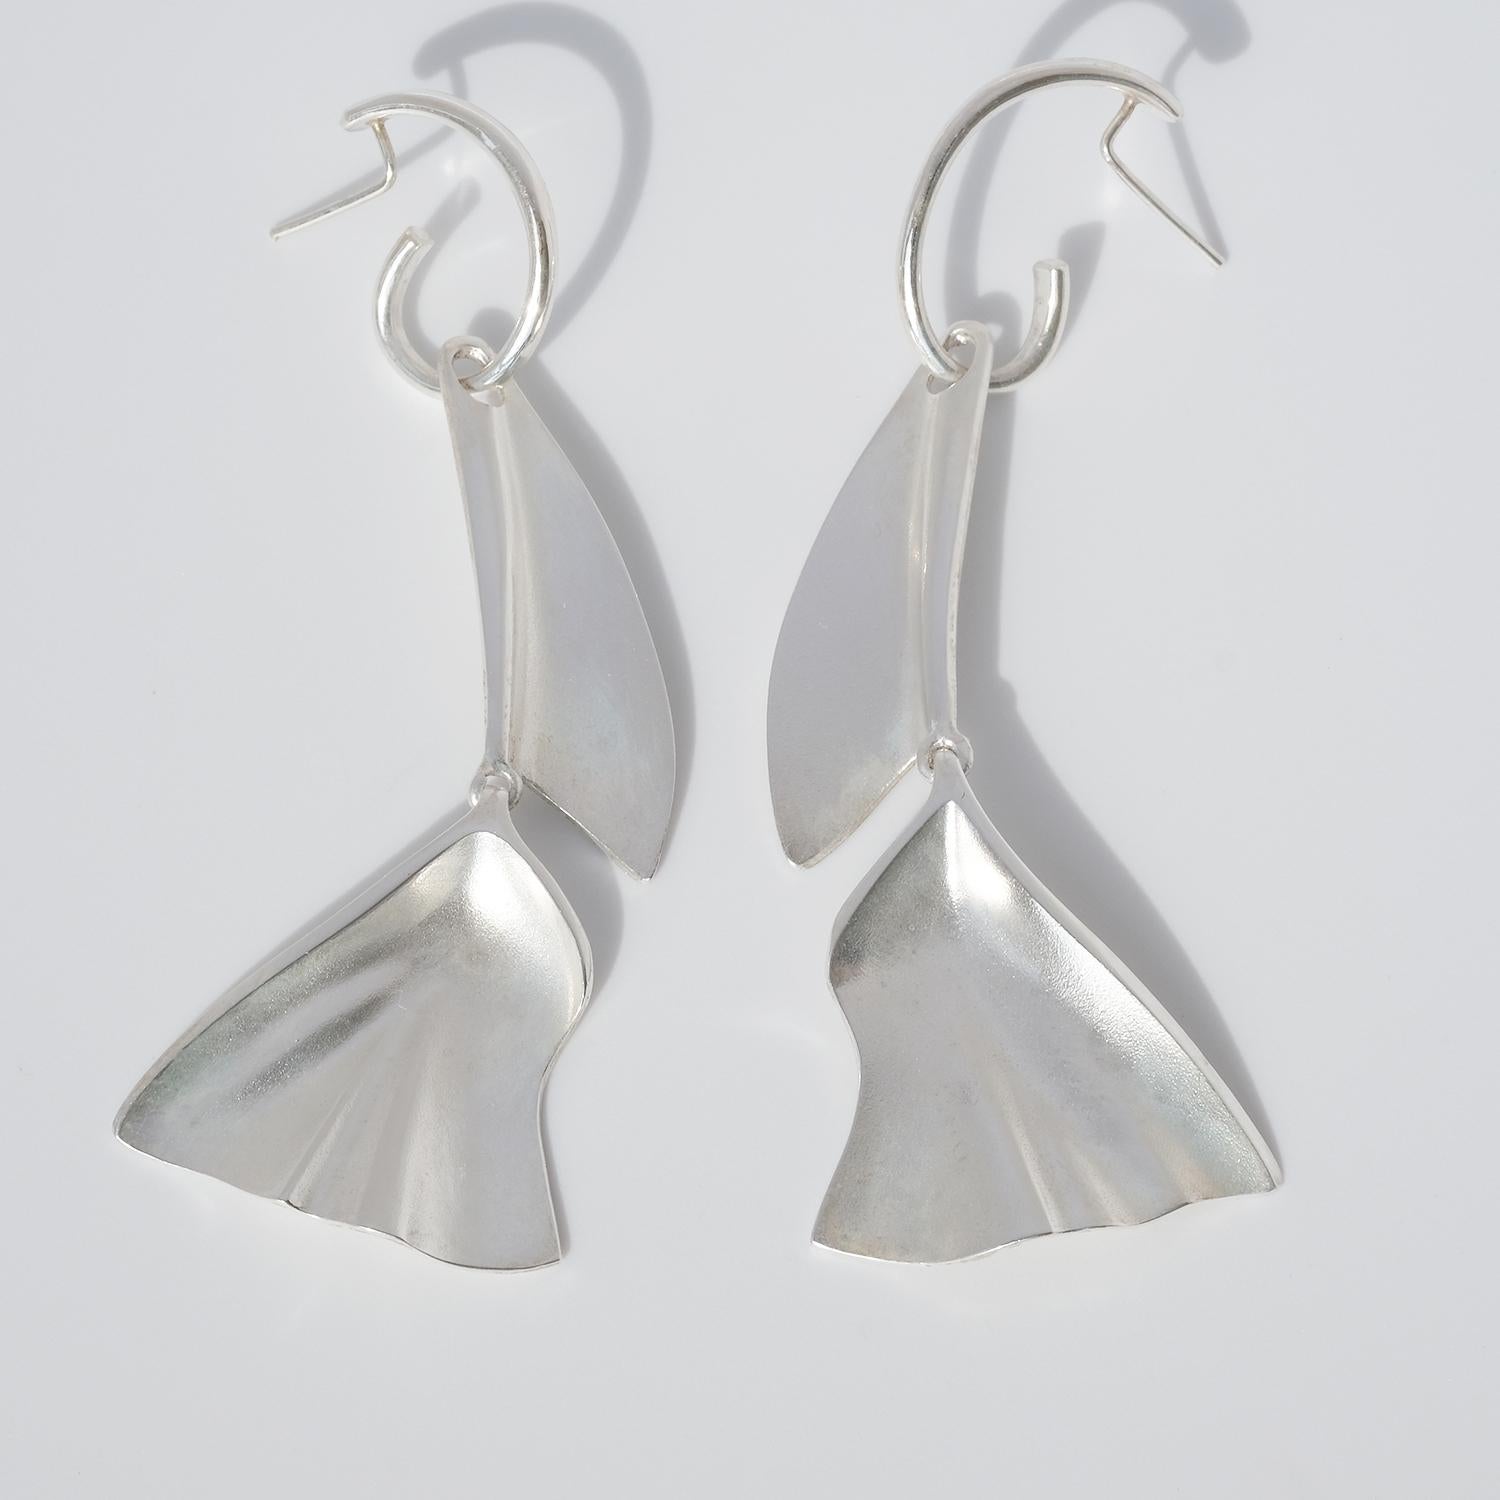 Pair of Finnish Silver Earrings Made in 1994 For Sale 2